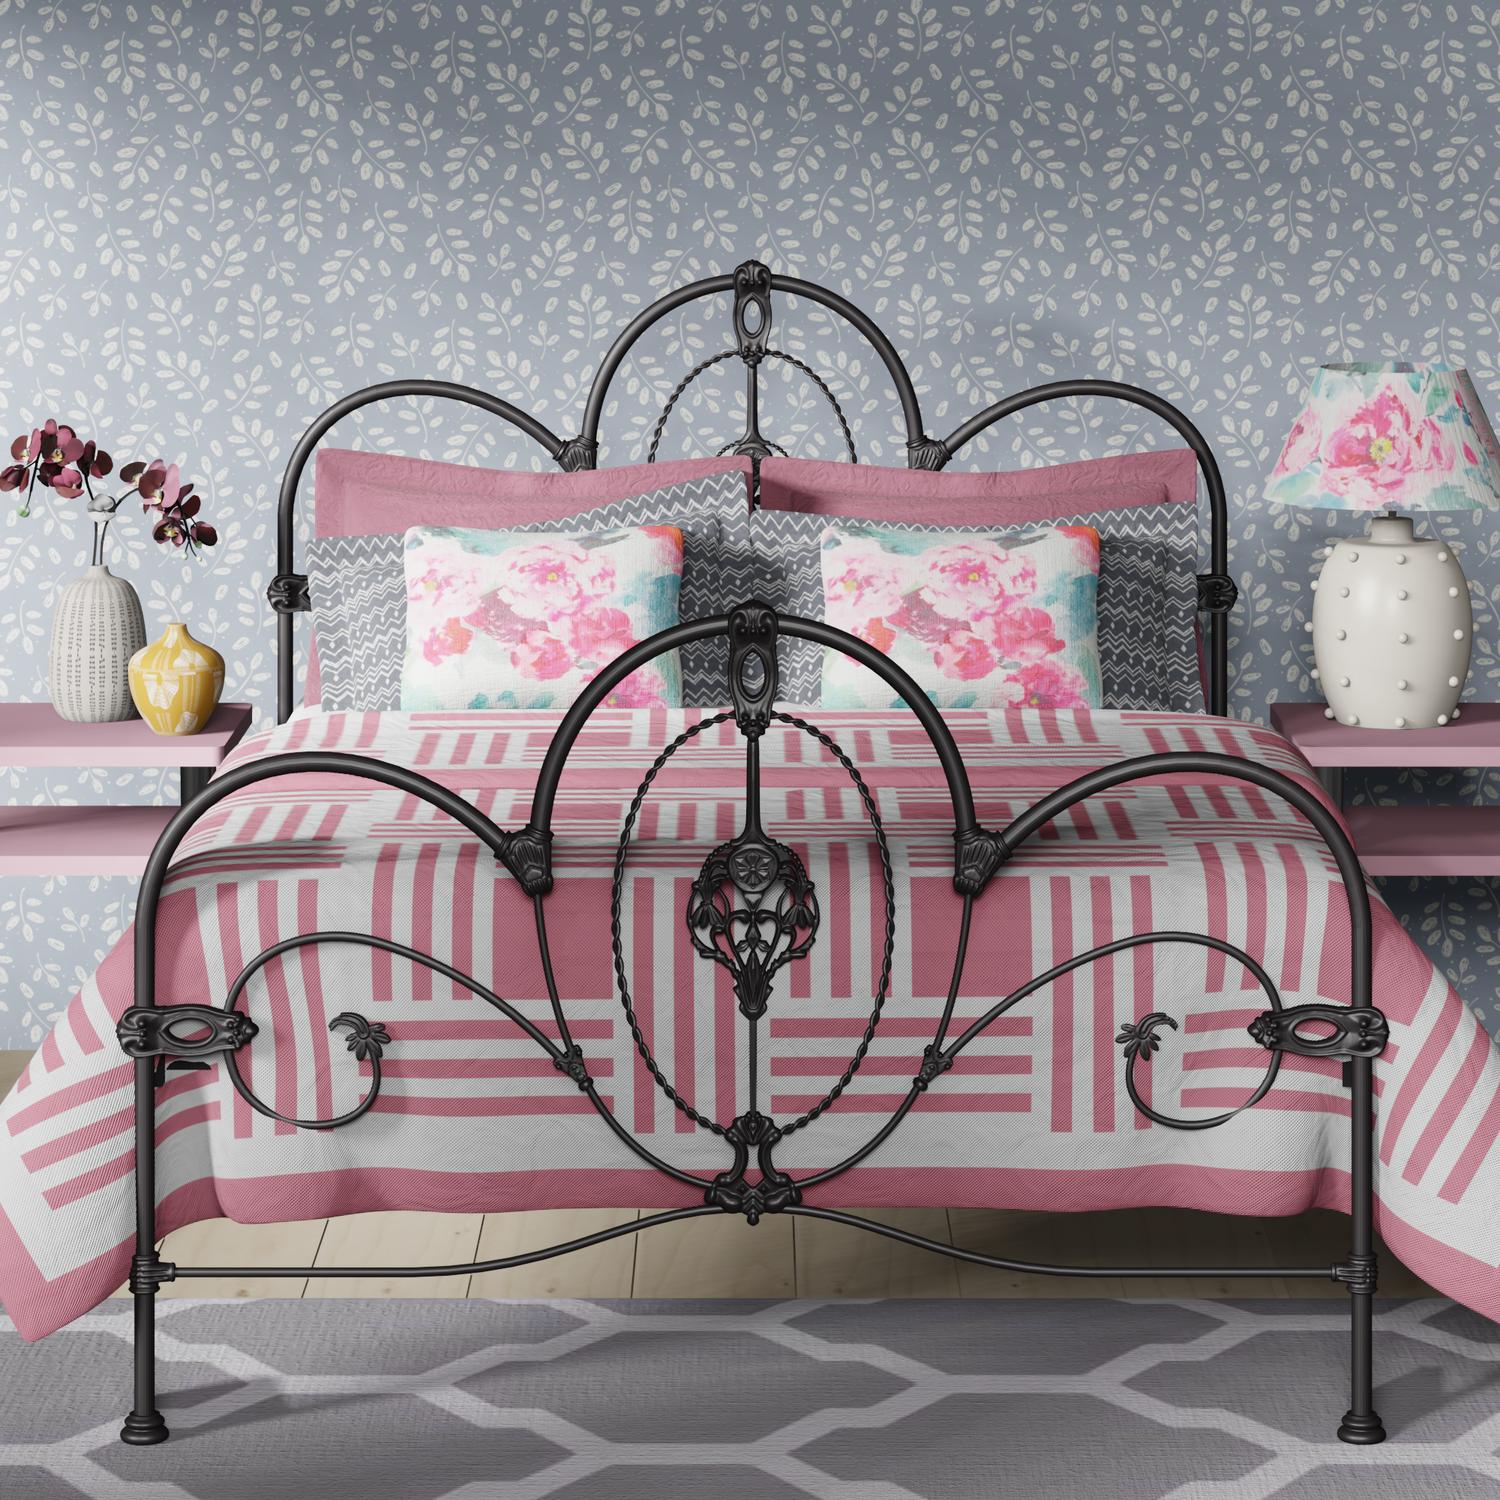 Ballina iron bed frame - Blue and pink bedroom